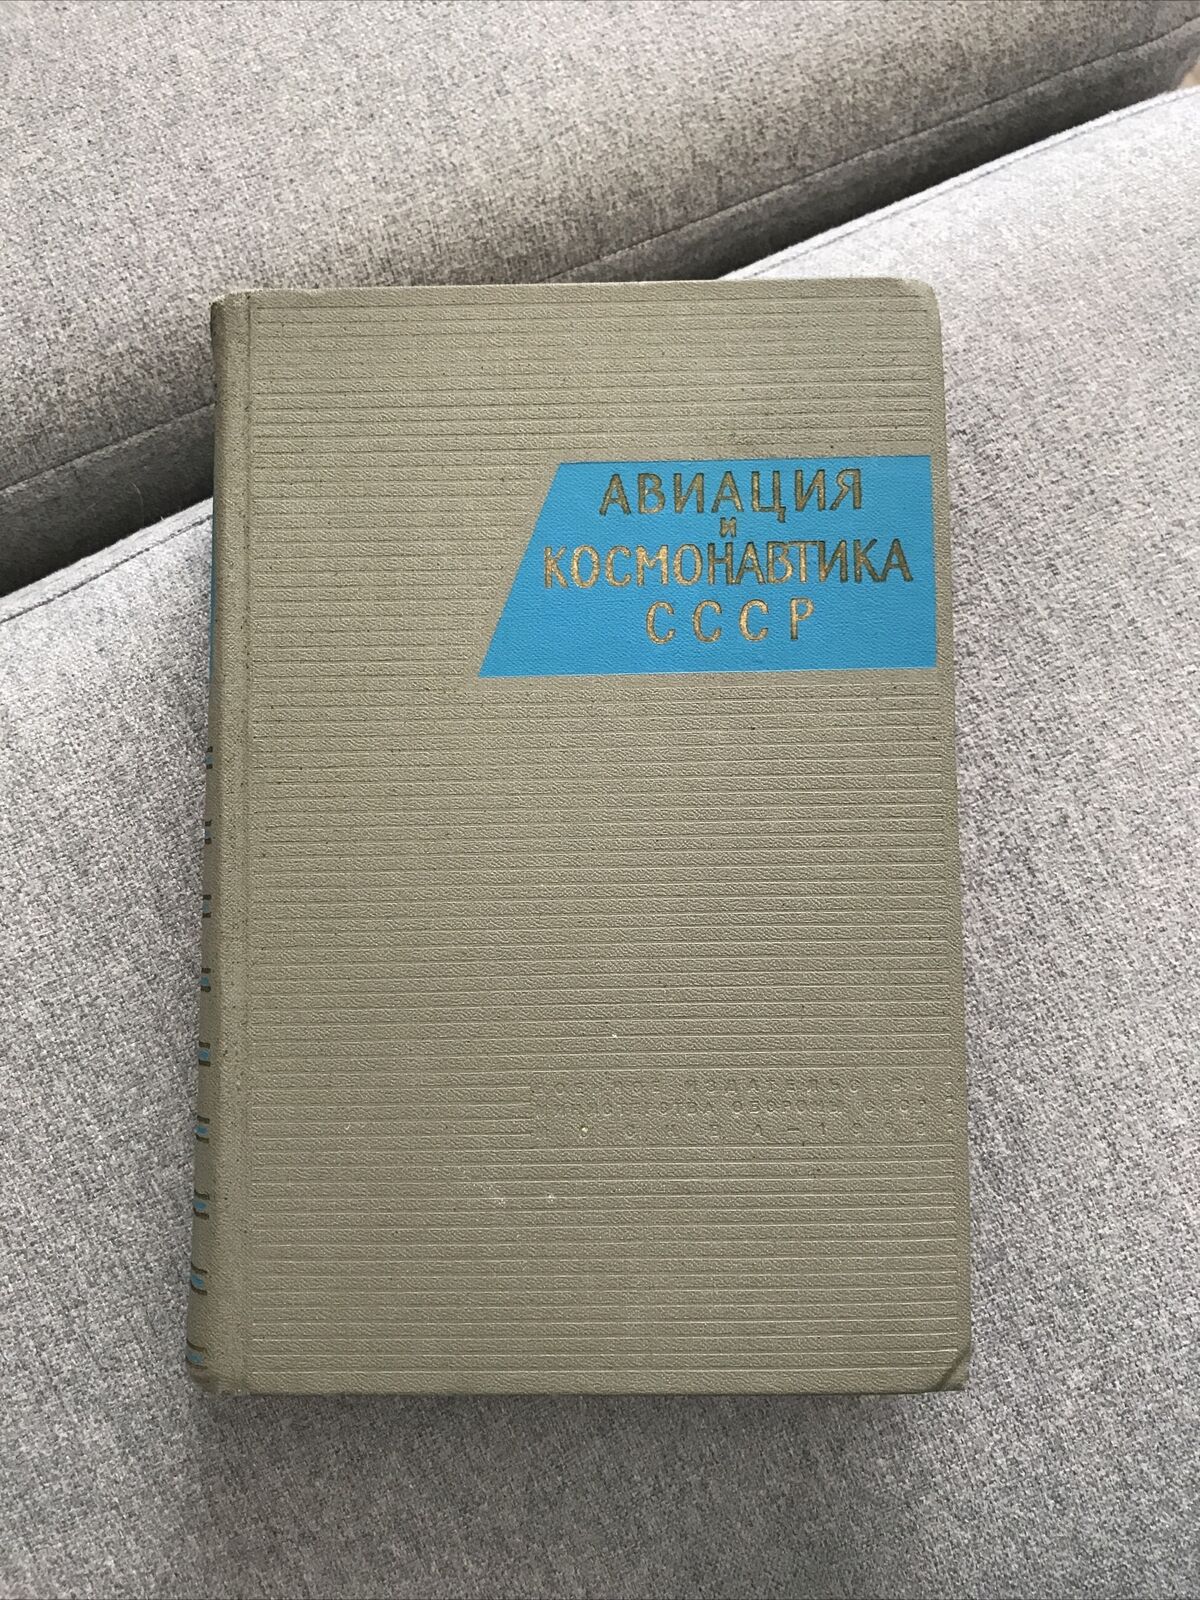  AVIATION & ASTRONOMY BOOK gagarin 1968 VINTAGE RUSSIAN USSR